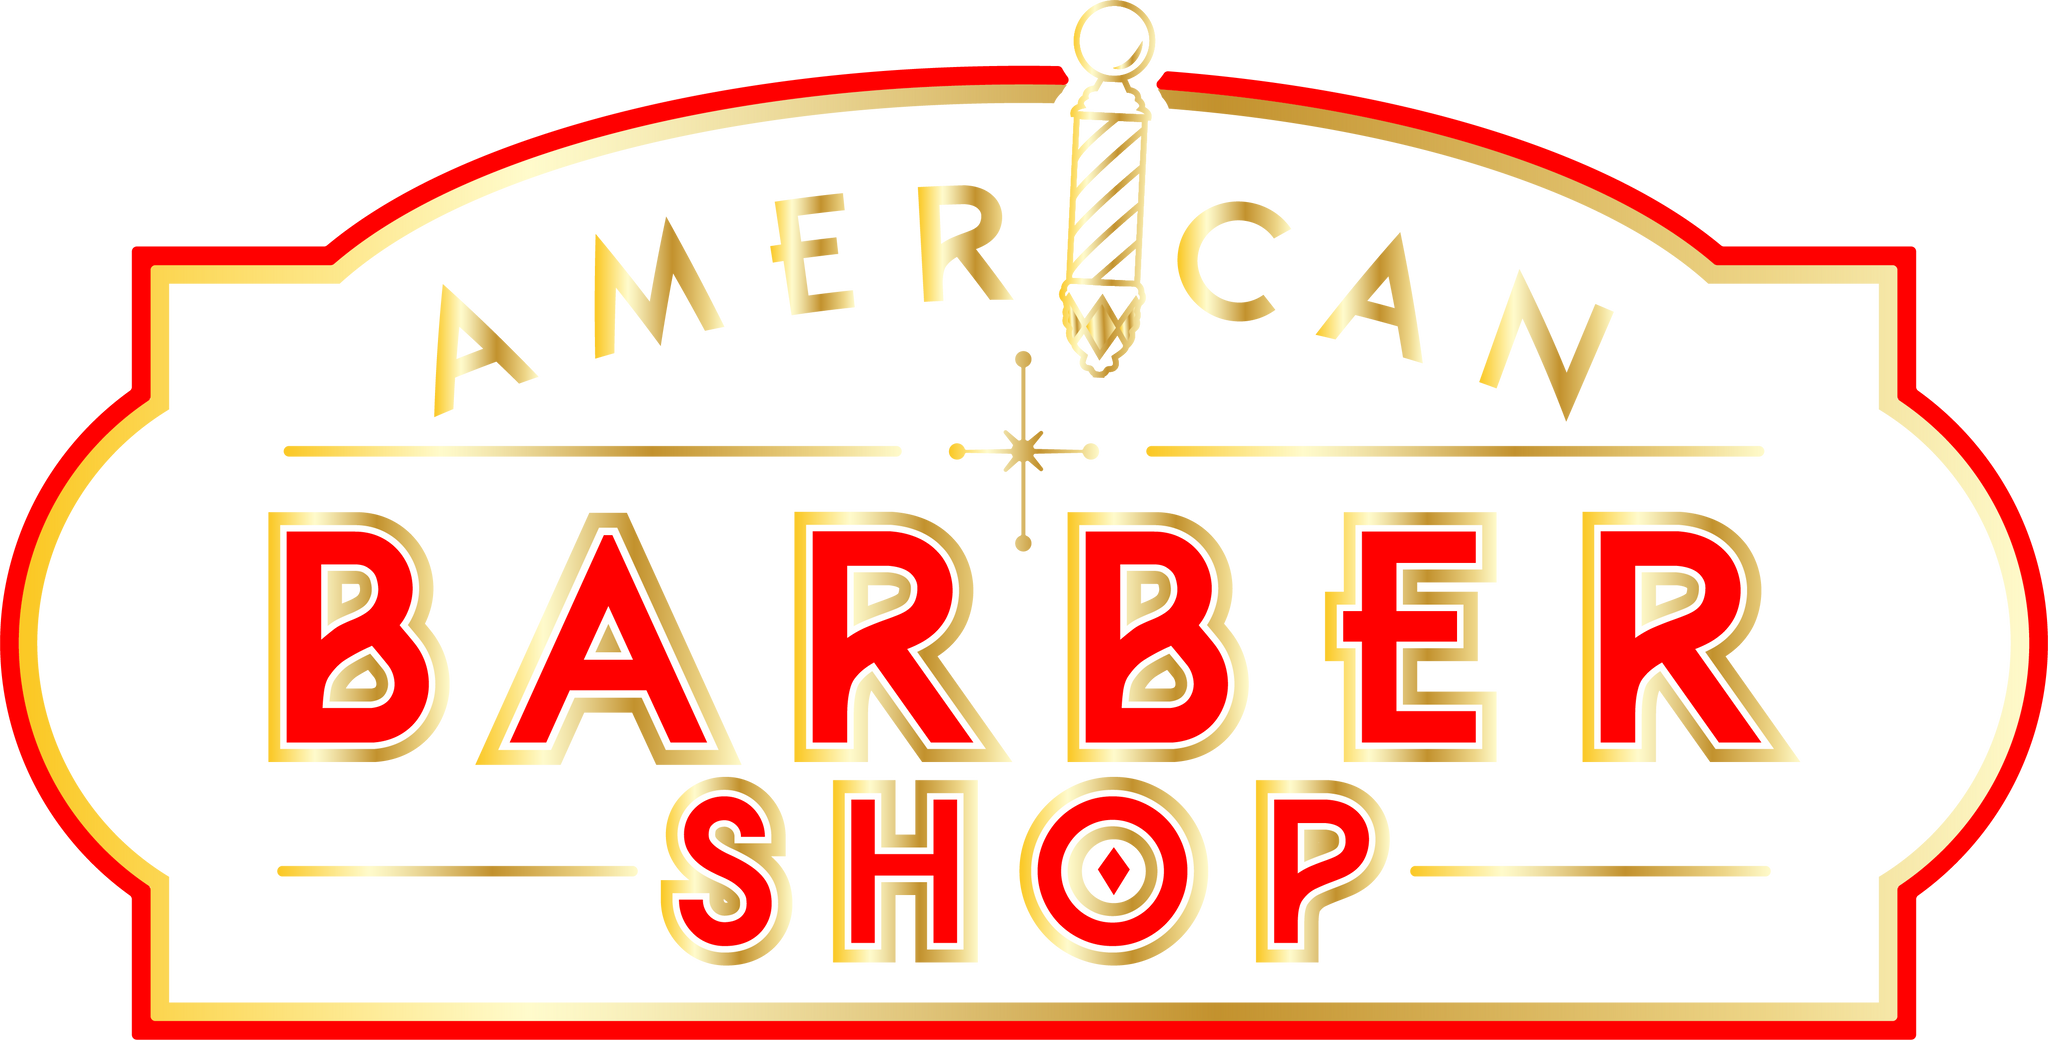 American Barbershop products card